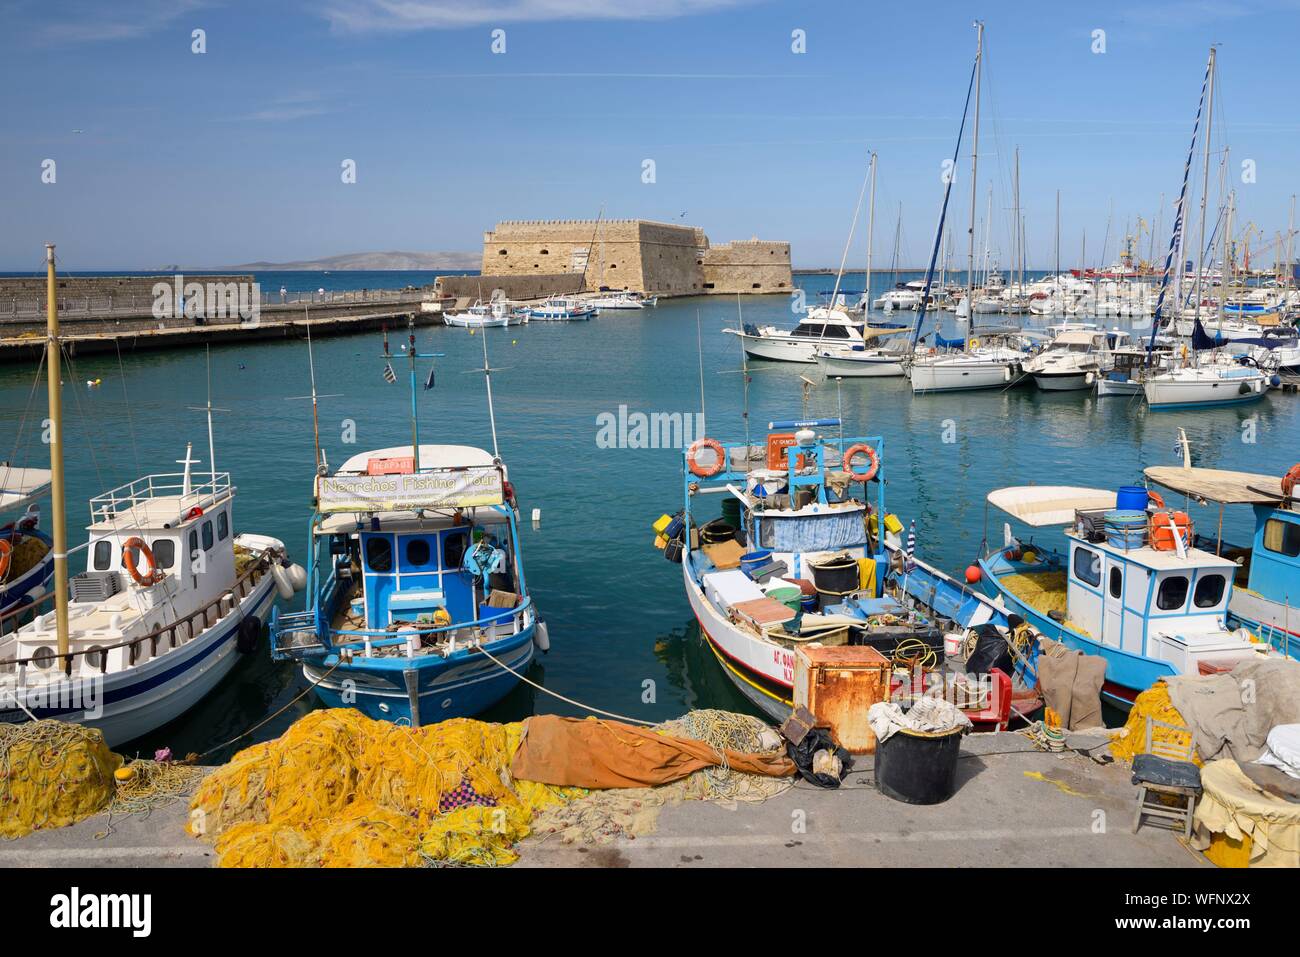 Greece, Crete, Heraklion, port of Heraklion and the fortress of Heraklion called fortress of Koules which is a Venetian building dating from 1523 Stock Photo